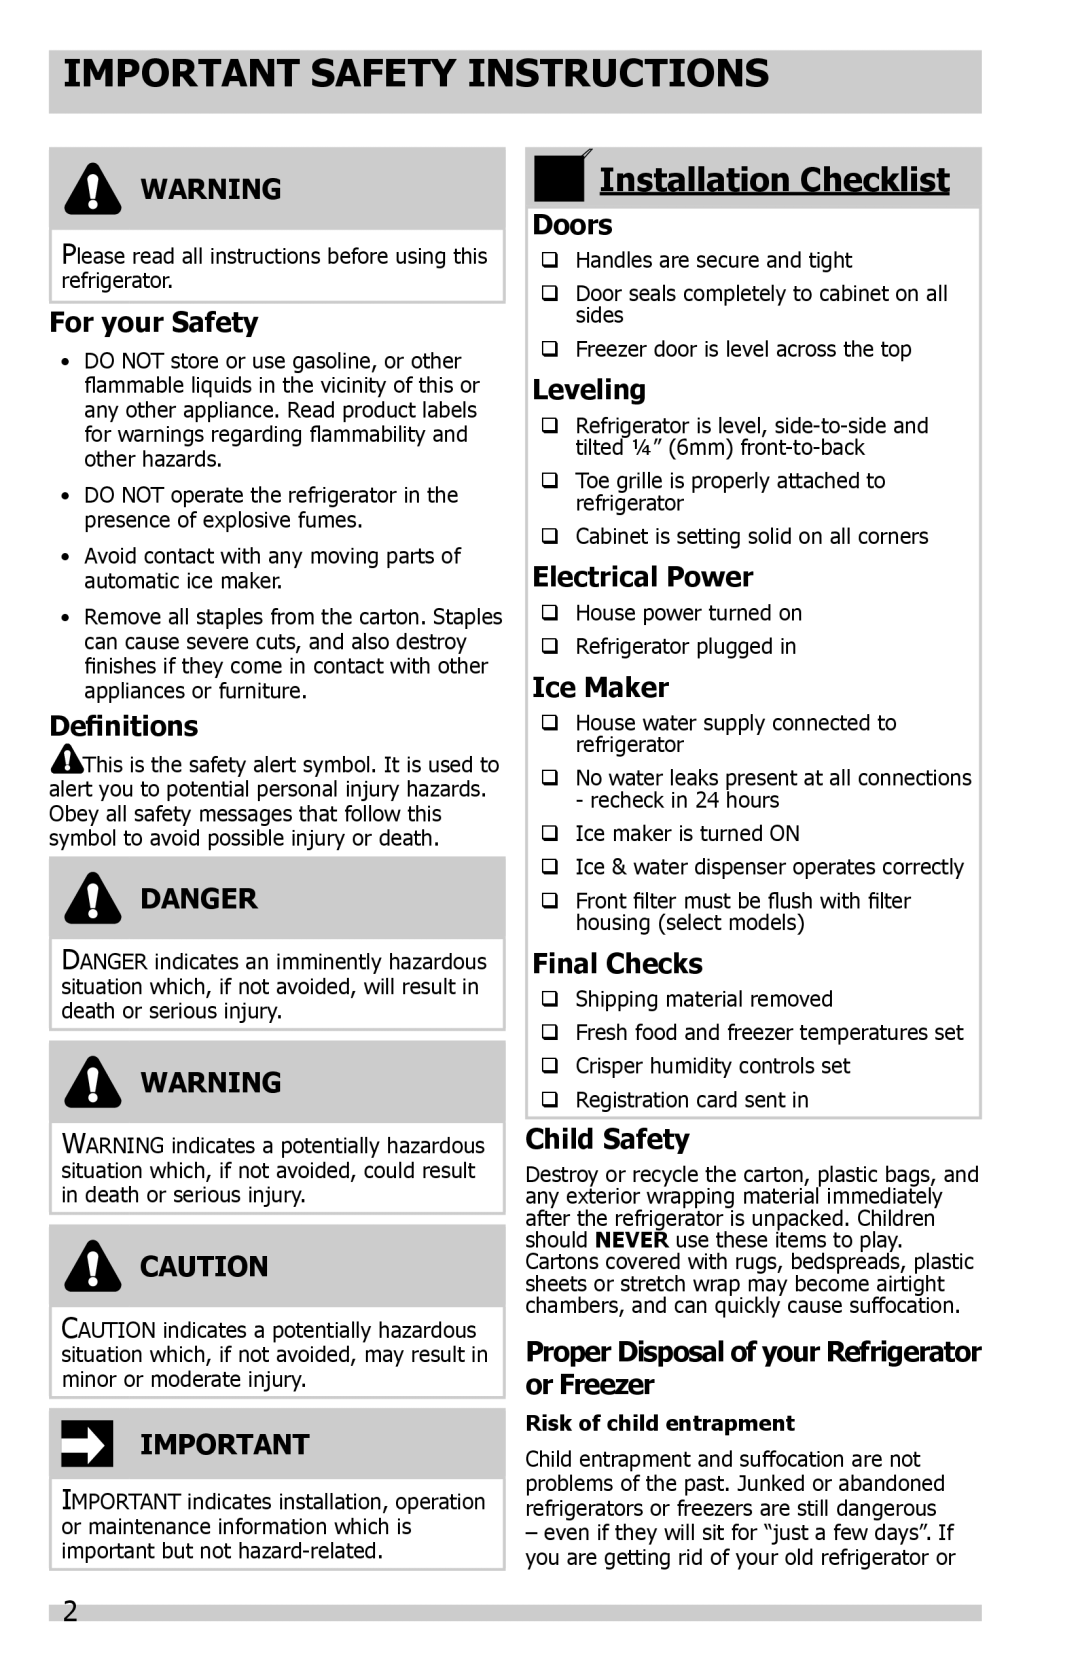 Frigidaire FFHS2622MS3 Important Safety Instructions, For your Safety, Definitions, Danger, Doors, Leveling, Ice Maker 